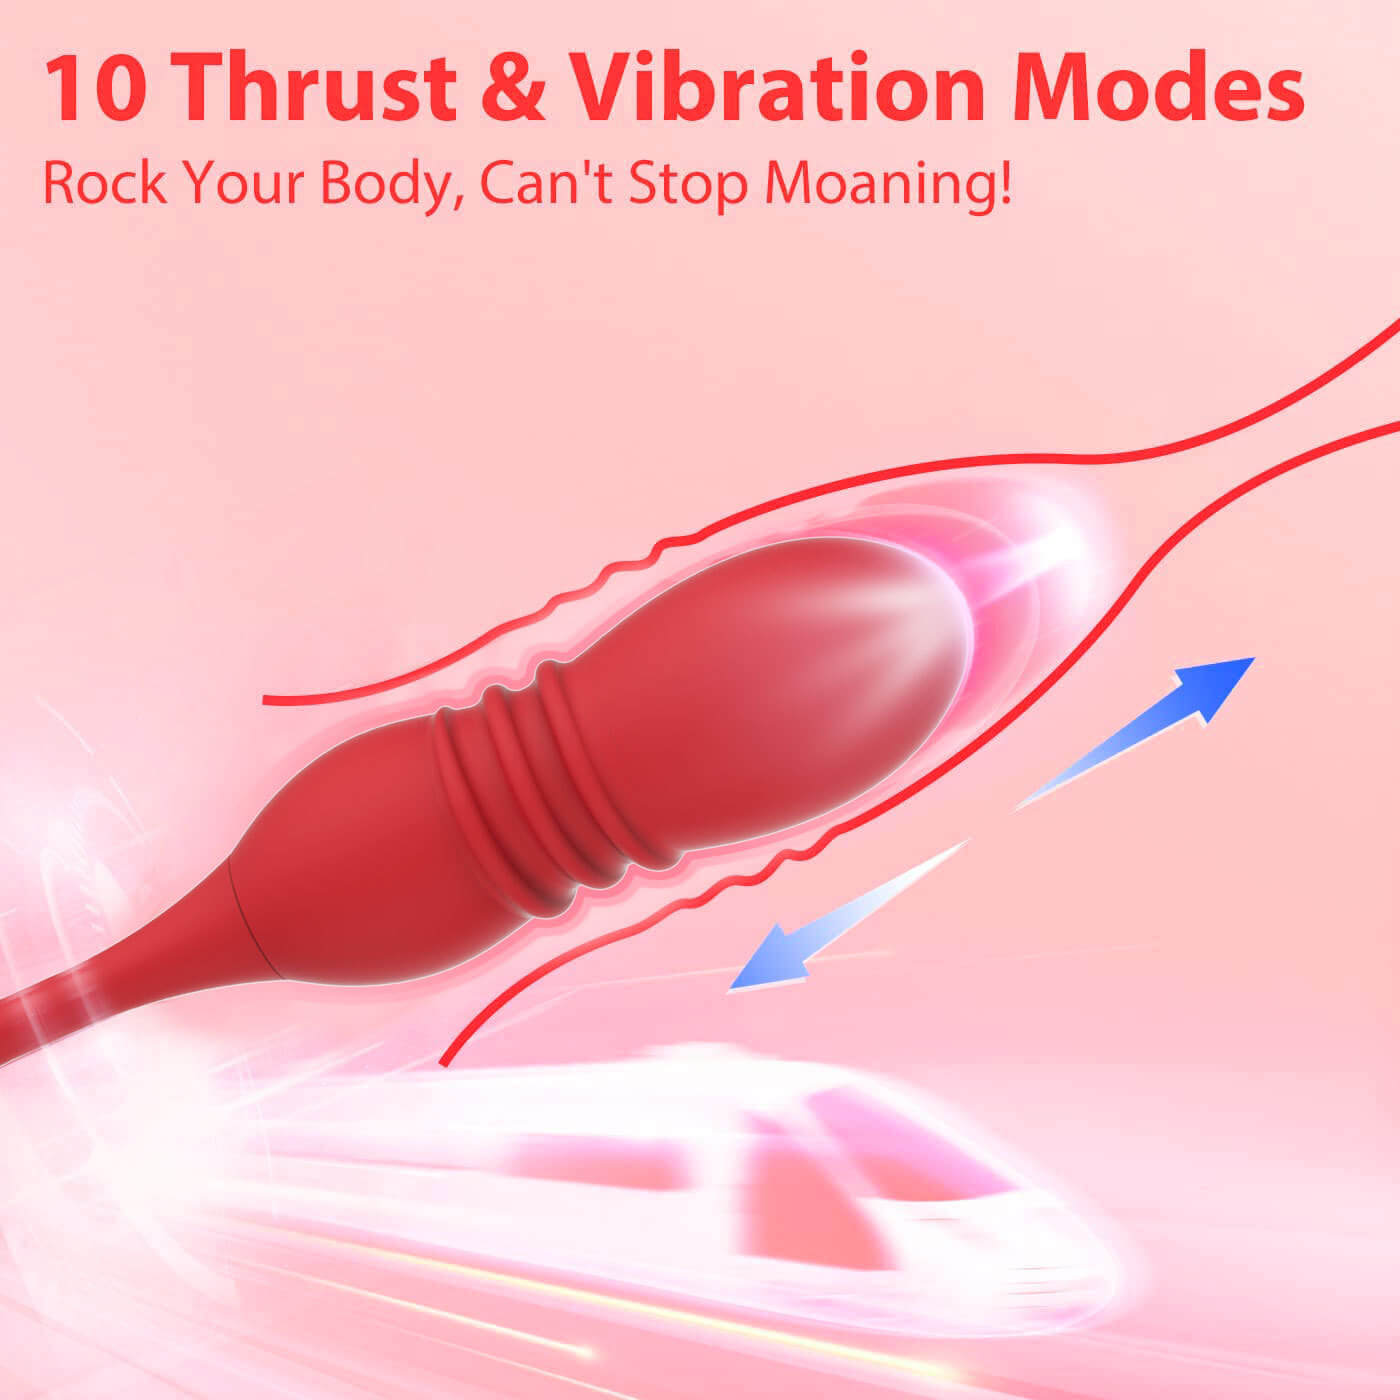 Vibrating Bouncing Rose Toy ootyemo-d914.myshopify.com